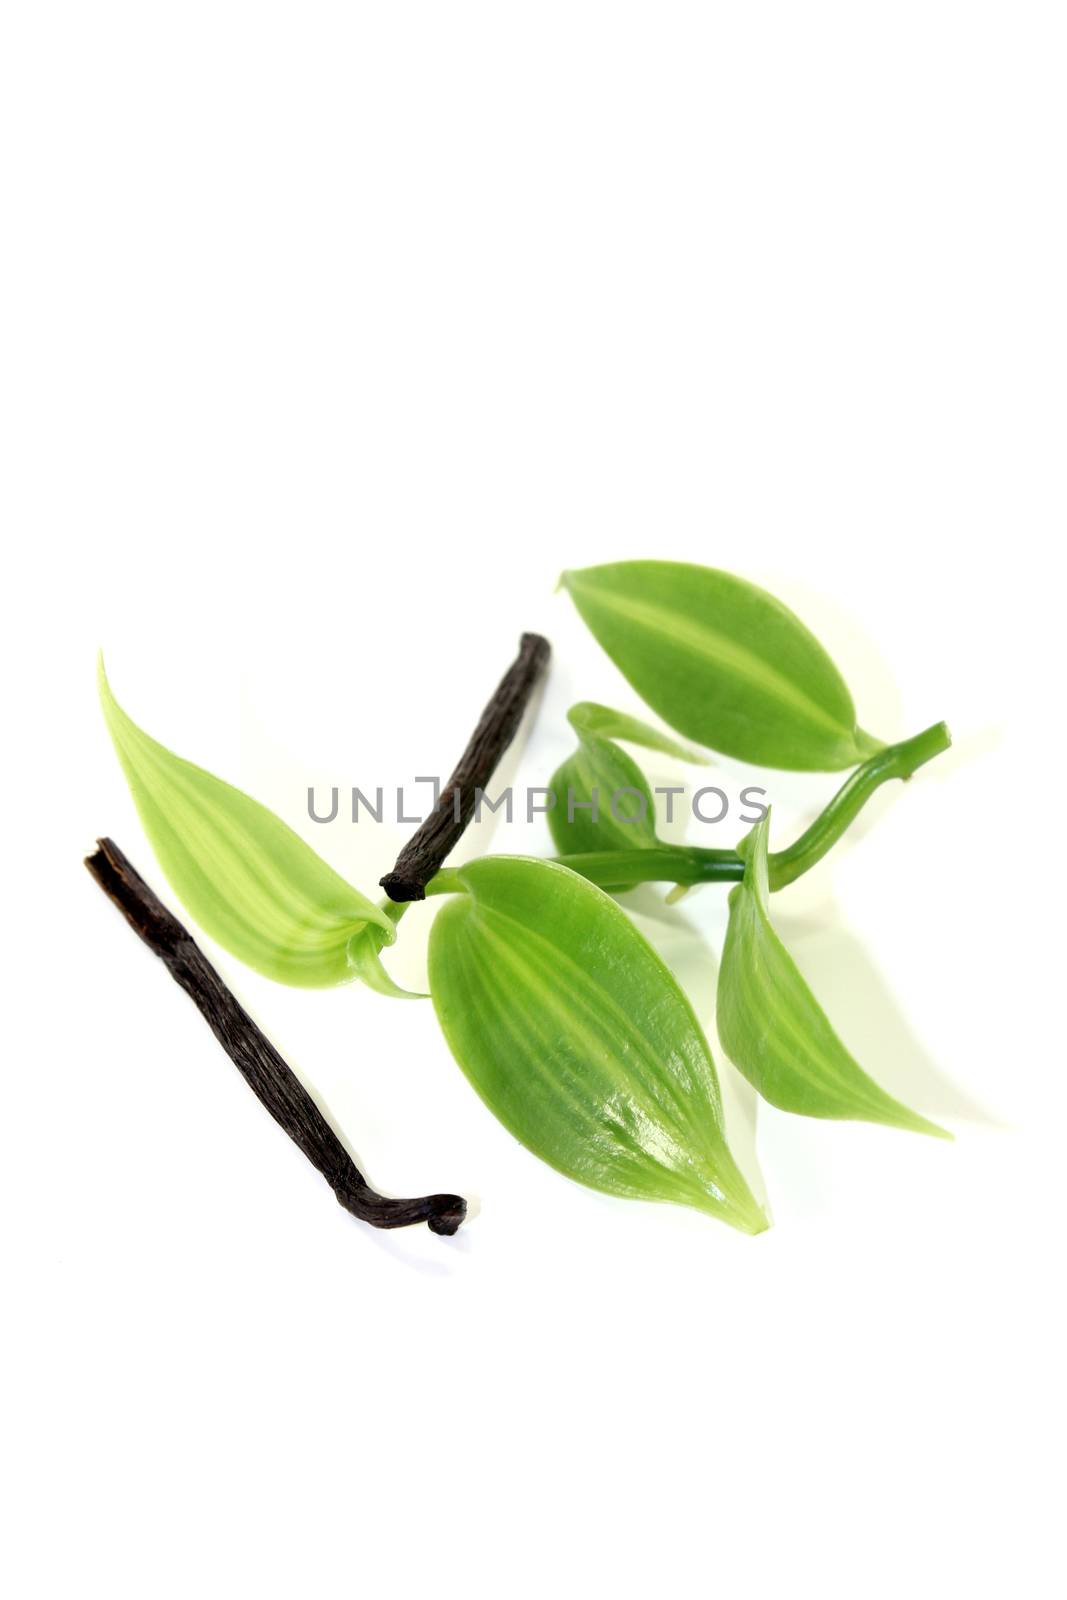 dark Vanilla sticks with green vanilla leaves by discovery